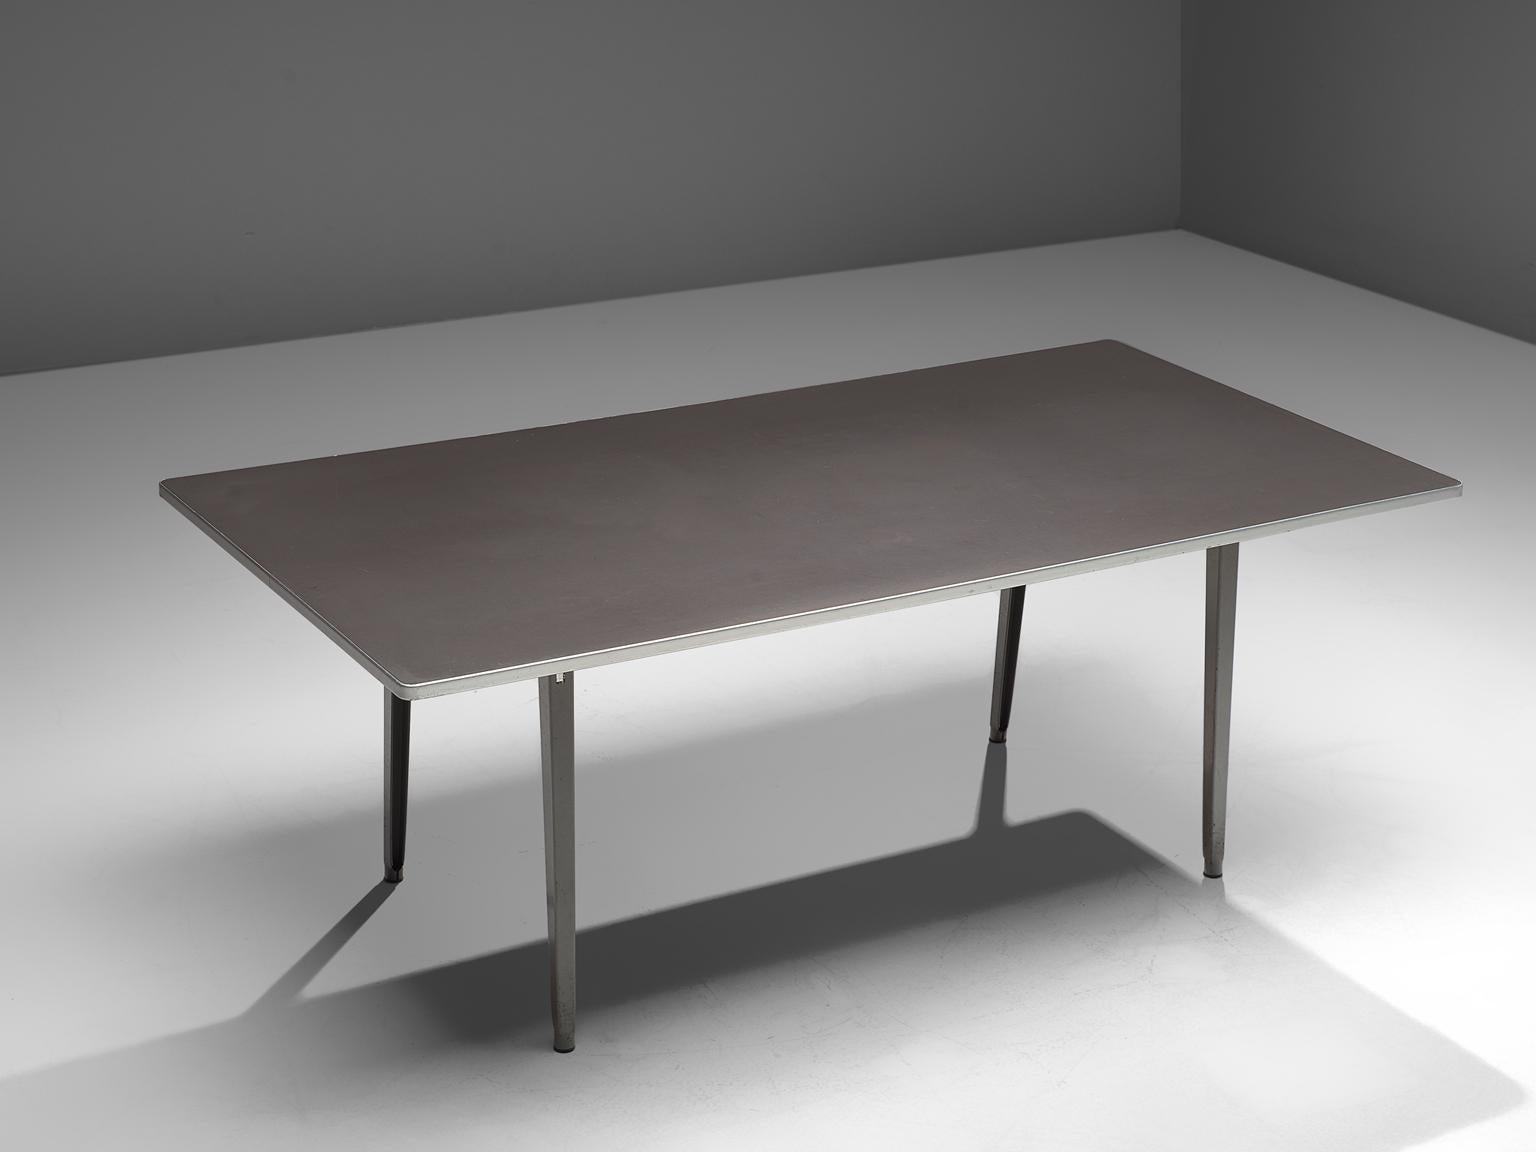 Friso Kramer for TH delft , conference table, metal, The Netherlands, 1940s. 

This work table is designed by Friso Kramer in the 1940s. The table features a modest design, with slightly tapered legs that are tilted. This table is an example of the